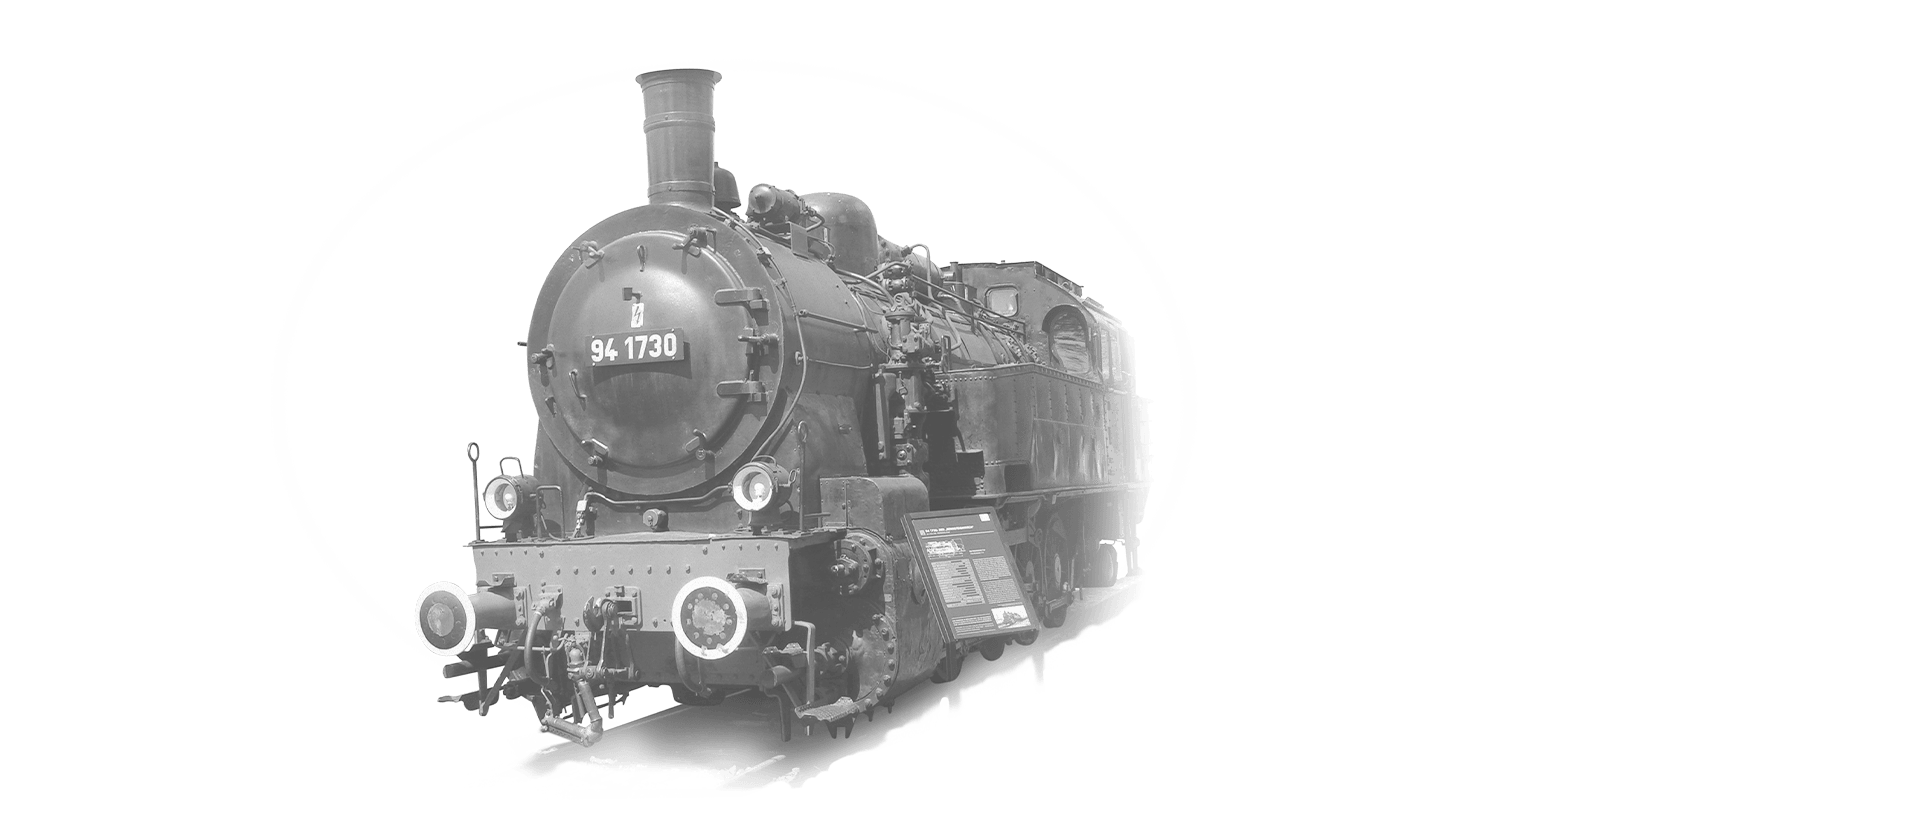 The locomotive 94-1730 is coming towards the camera in black and white